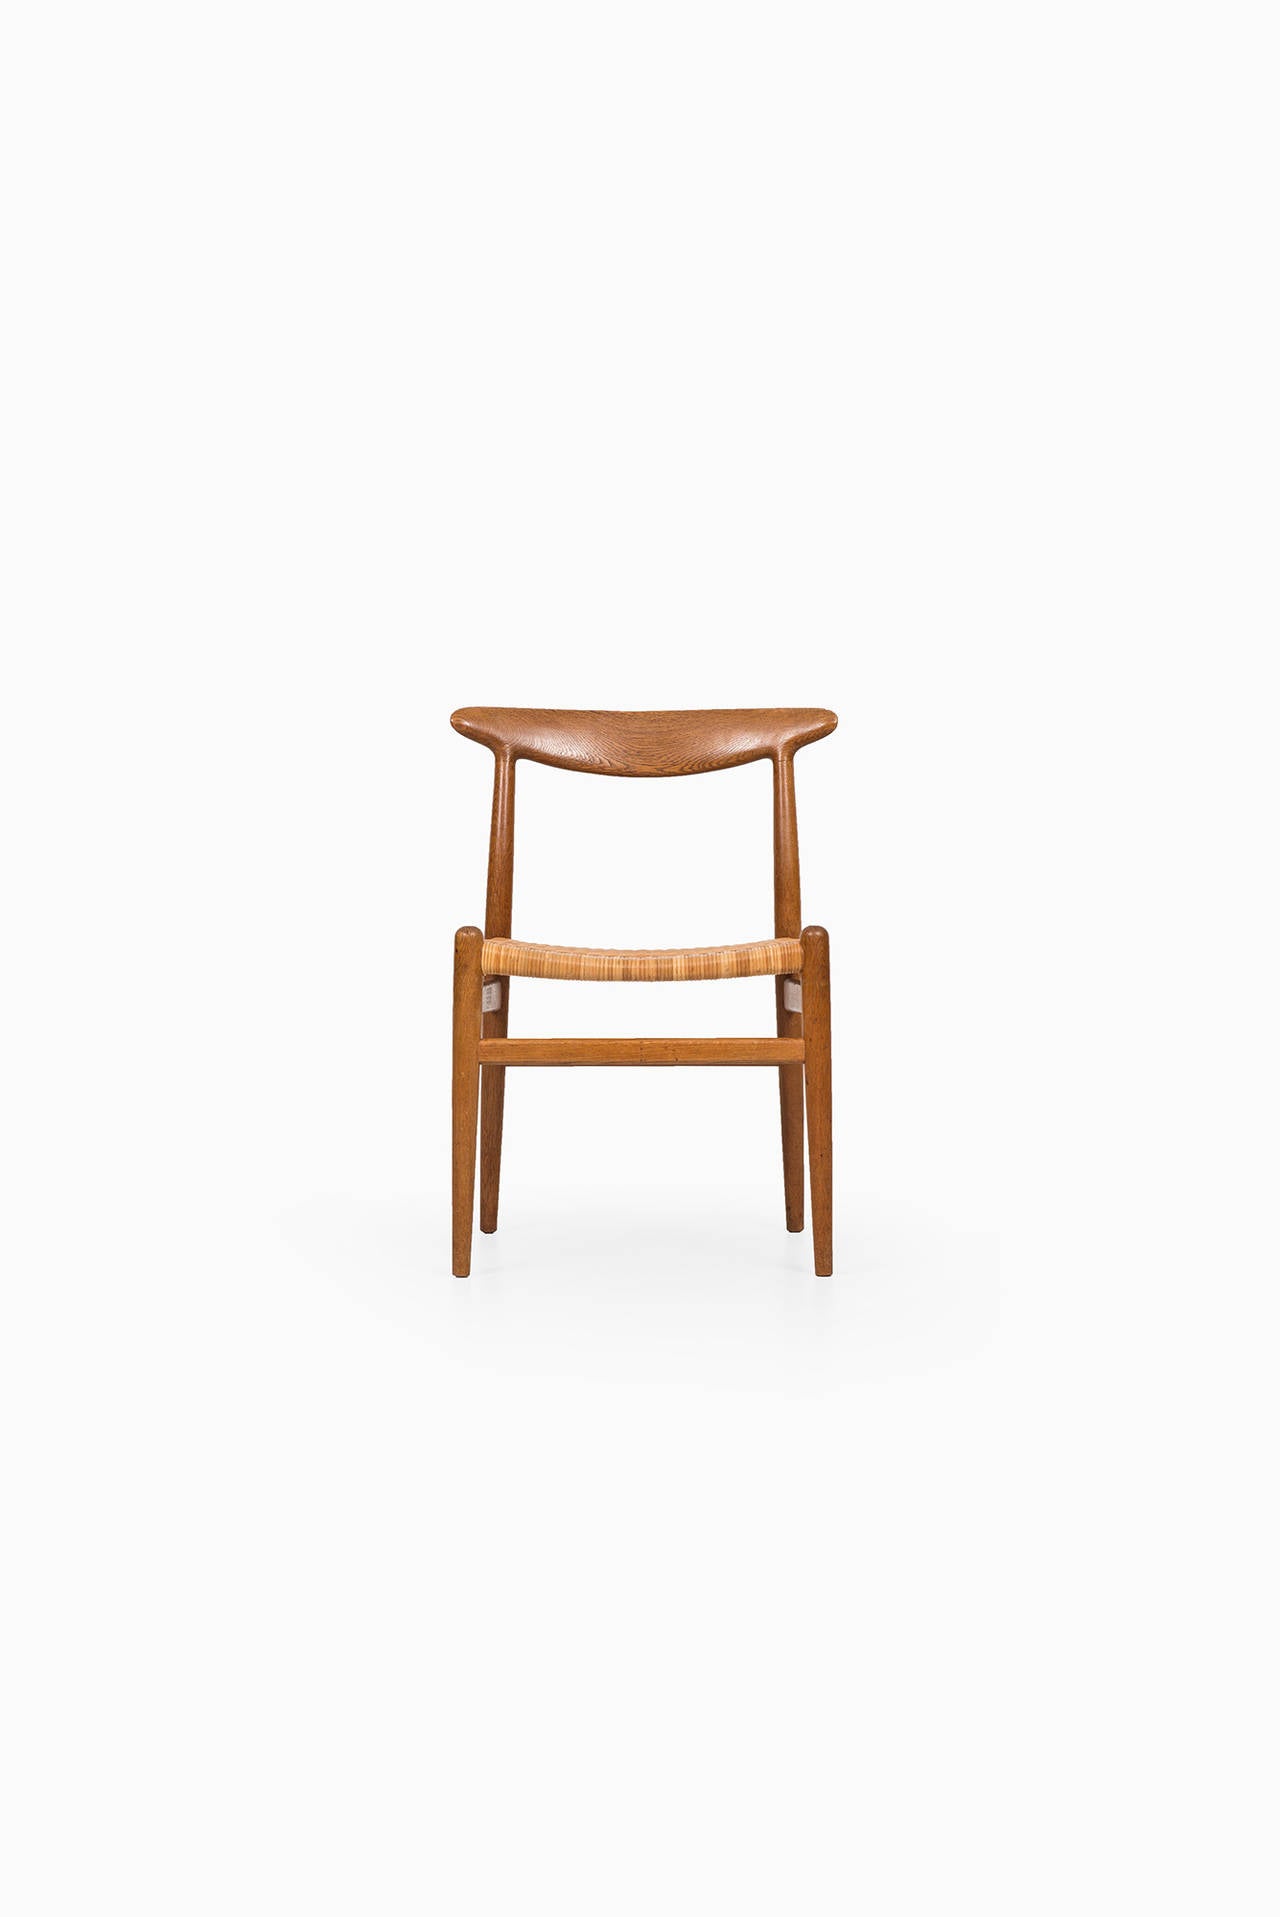 Set of four rare Hans Wegner dining chairs model W2. Produced by C.M Madsen in Denmark.